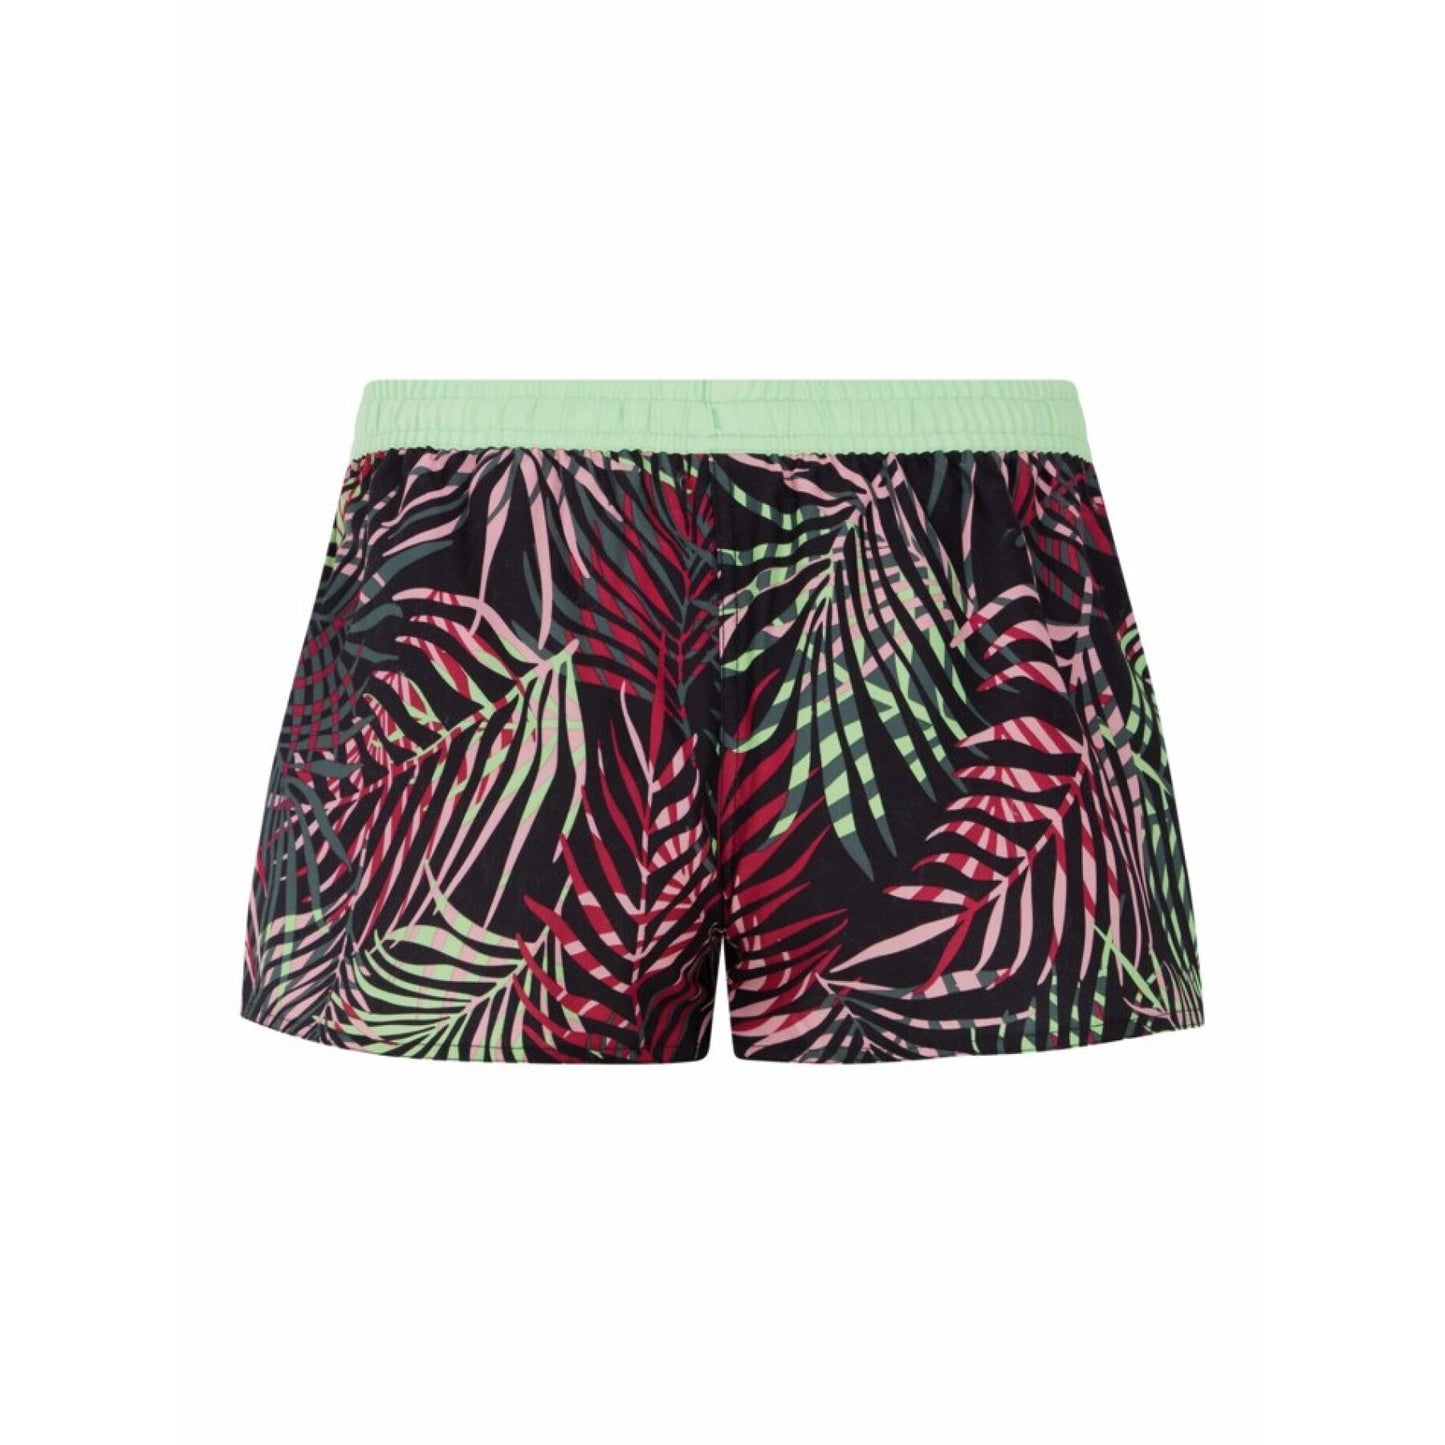 Protest Spy Beach Shorts in Pillow Pink